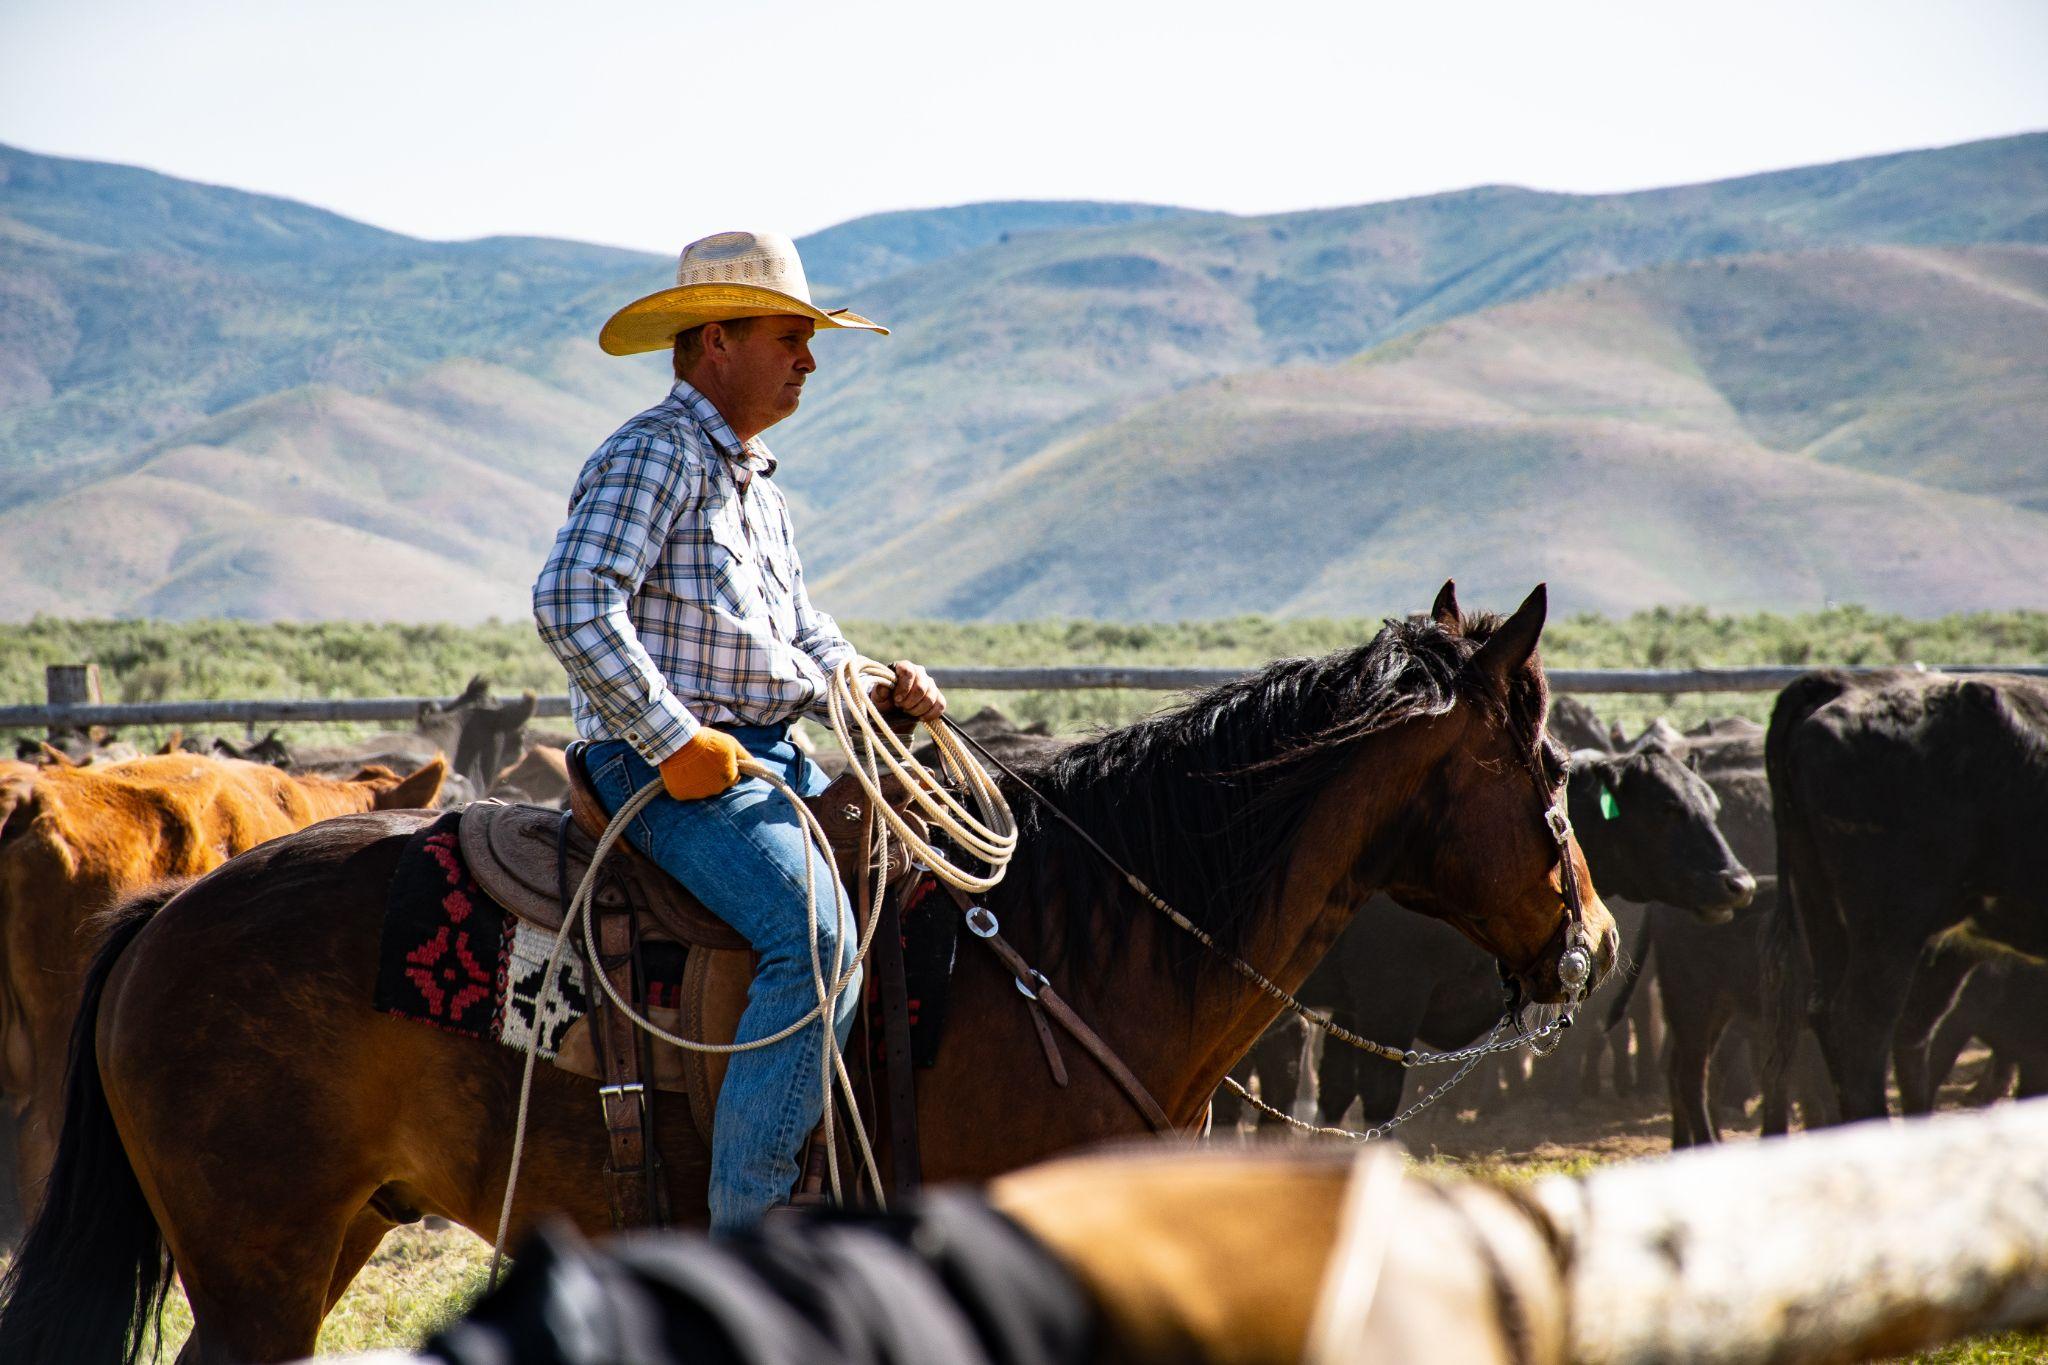 Cowboy riding a horse and carrying a lasso amid a penned-in herd of horses.